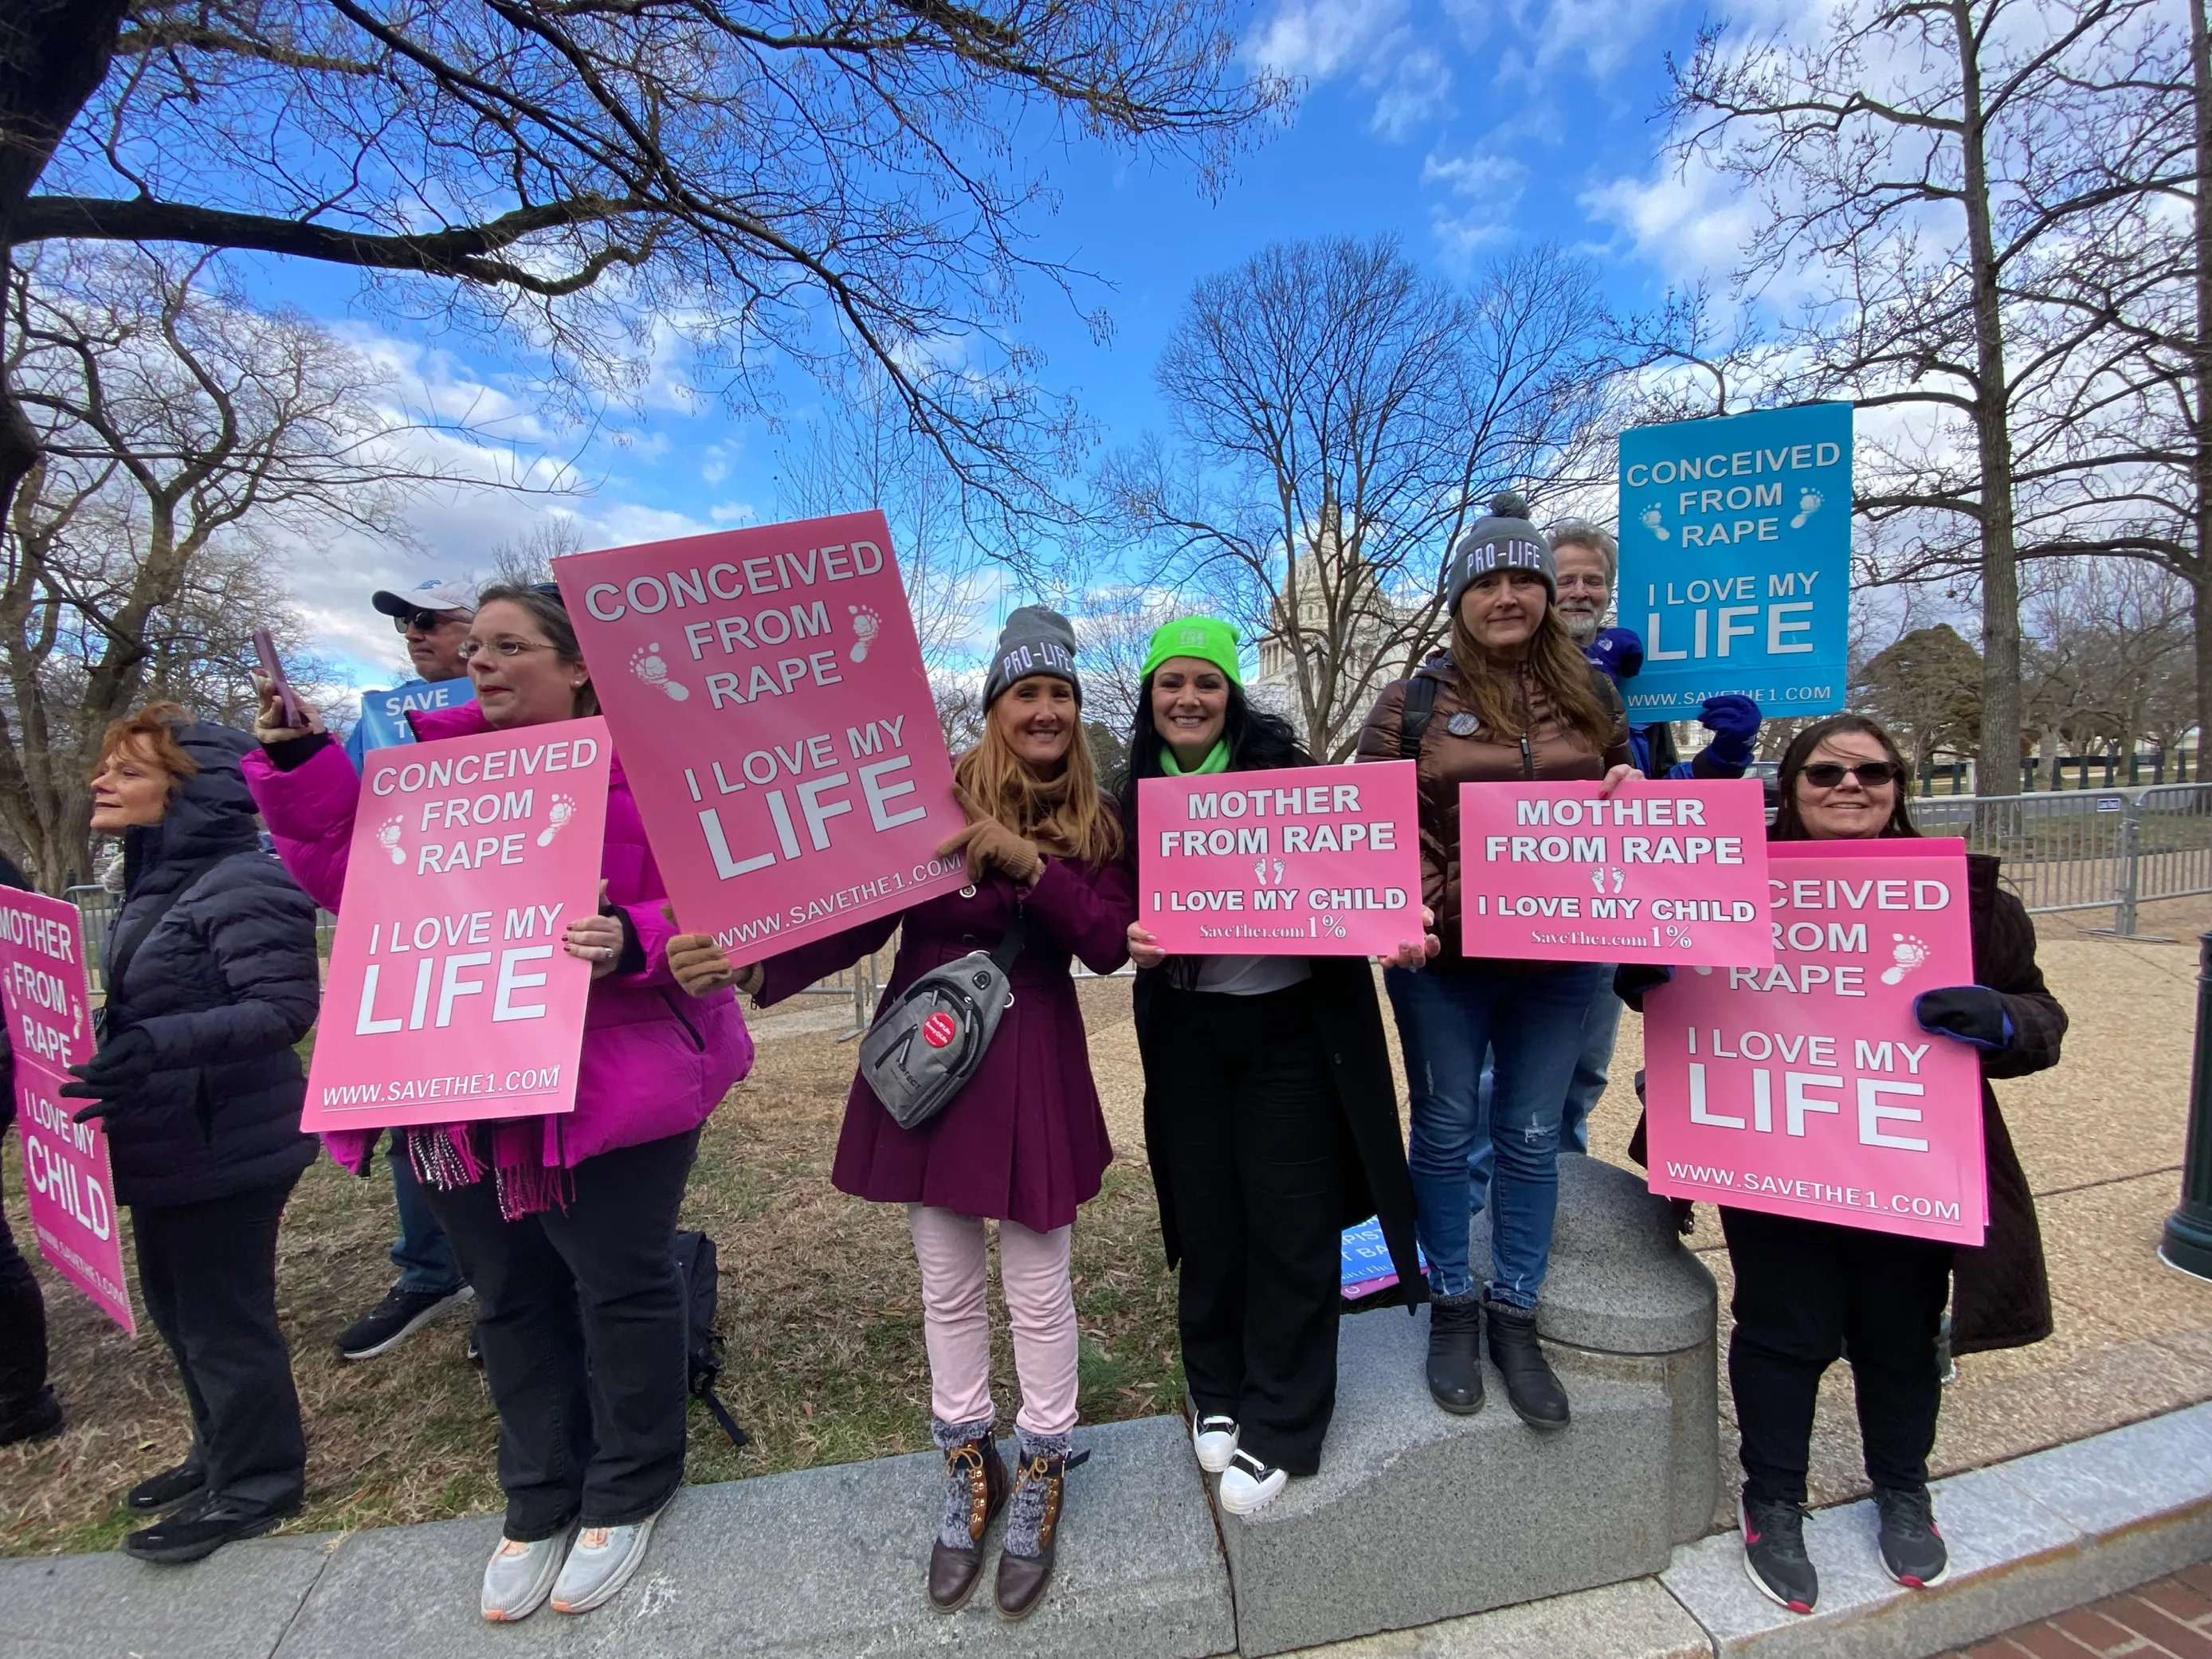 Rebecca Kiessling and her group, Save the 1, hold pro-life signs at the March for Life. Katie Yoder